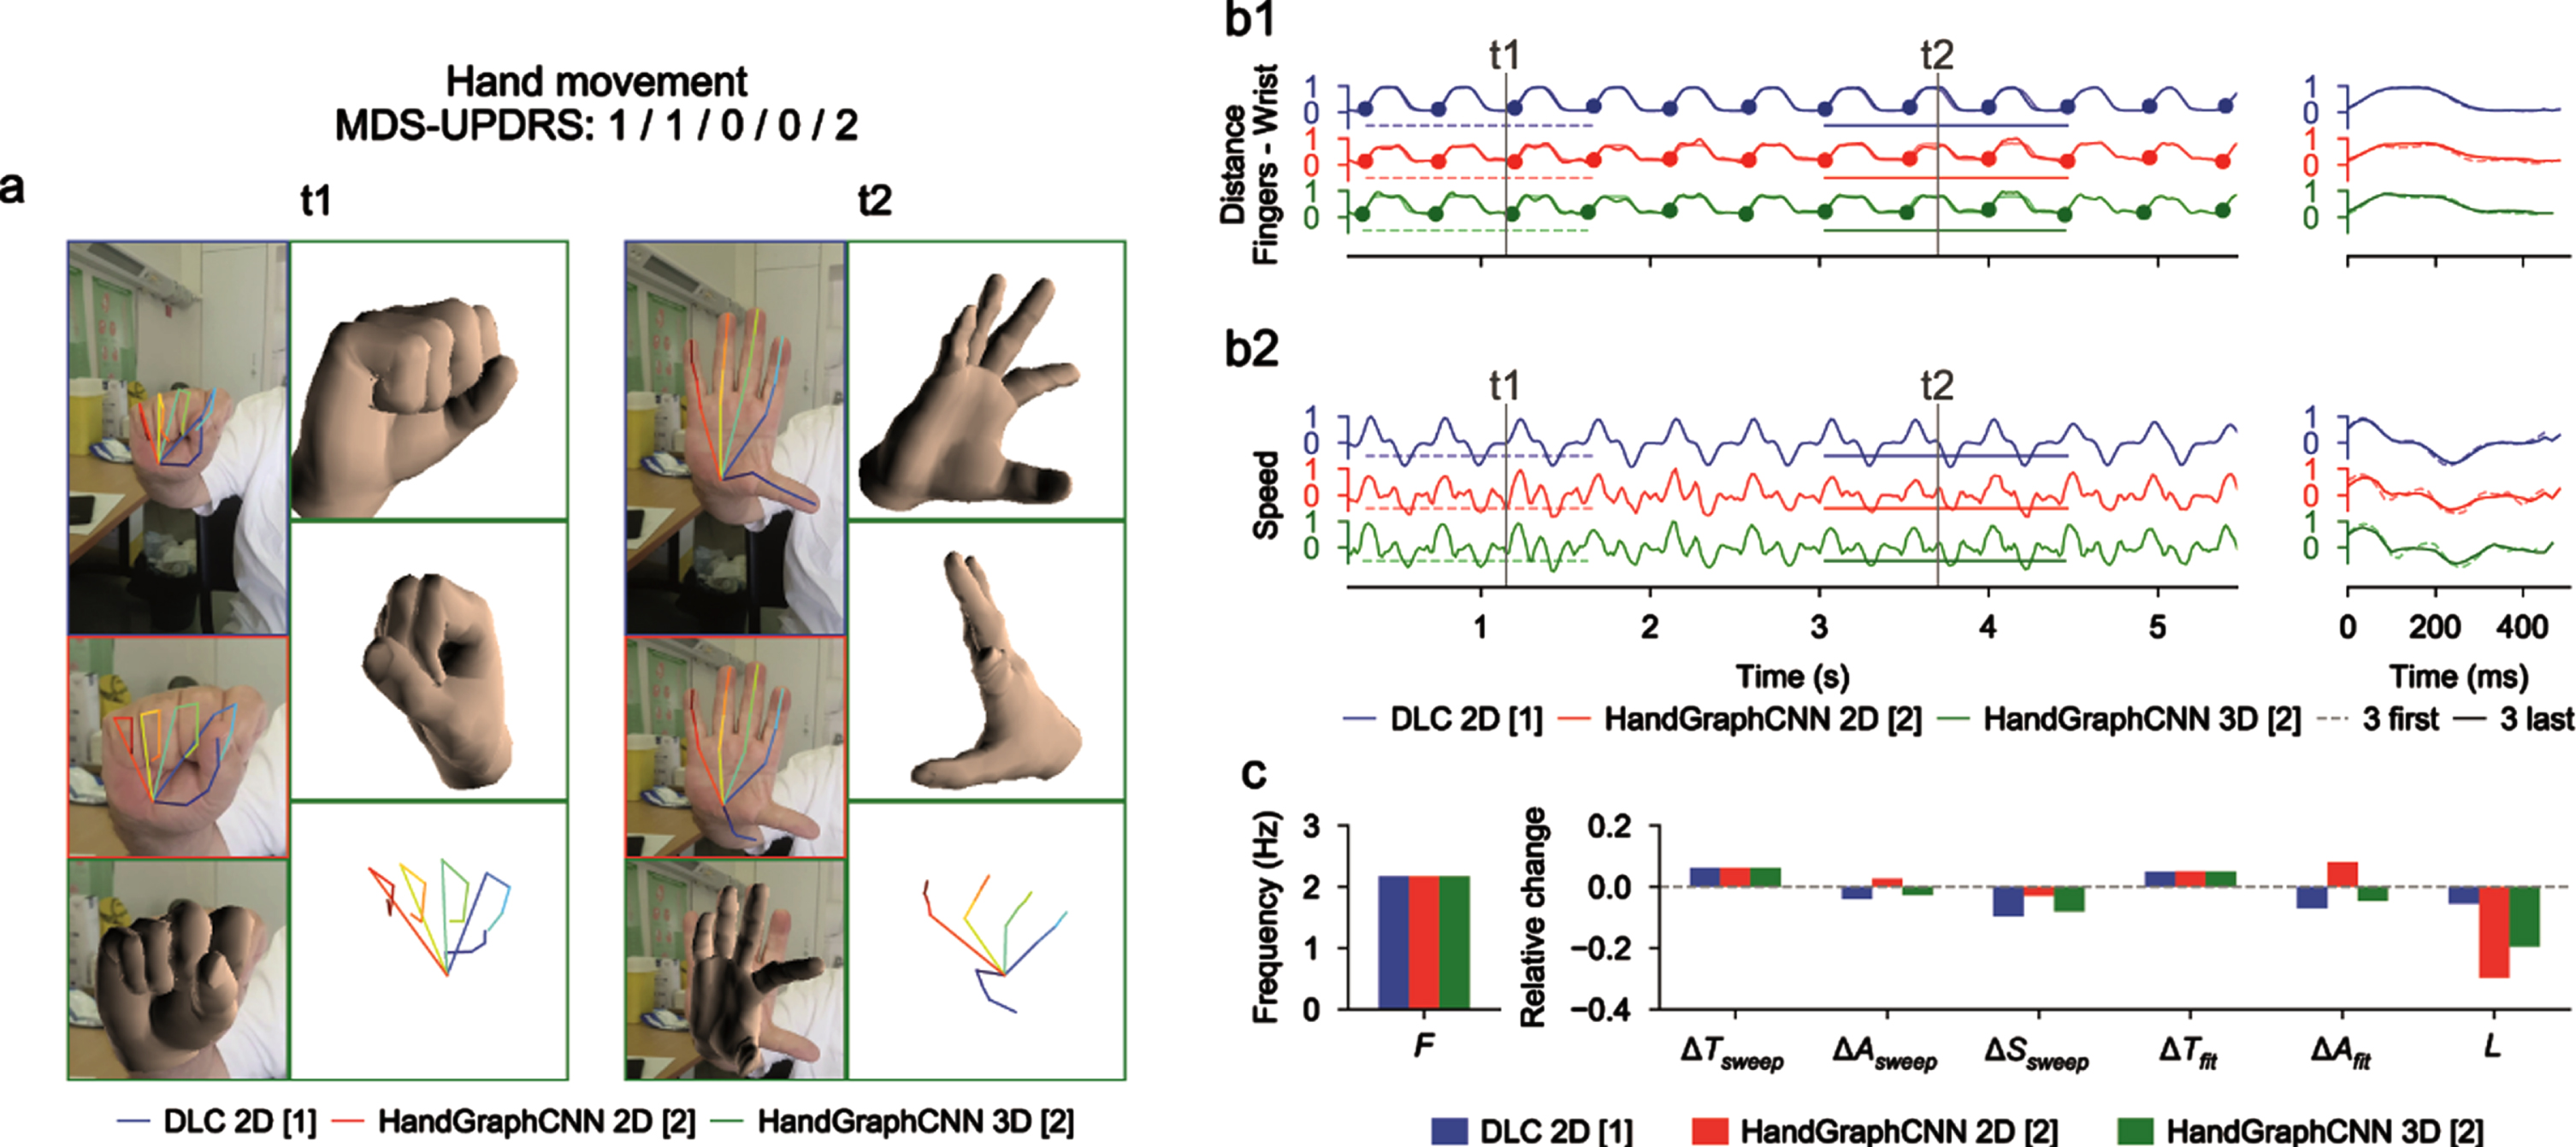 Video analysis using deep learning algorithms for hand movements protocol (associated Supplementary Movie 2). a) Snapshots from the initial videos, with the different skeletons extracted using the two deep learning algorithms (blue DeepLabCut 2D, red HandGraphCNN 2D, green HandGraphCNN 3D). b1, left) Evolution of the averaged distance between each finger tip and the wrist point with 9 sweeps (delimited by the 10 plain circles on each trajectory). b1, right) First three sweeps (dotted lines) compared to the last three ones (plain lines). b2) same as (b1) for the speed. c) Frequency F, fatigue L, relative variation of the period ΔTsweep, amplitude ΔAsweep, speed ΔSsweep accross the protocol, more complex variation coefficients, ΔTfit and ΔAfit based on the fit of a periodic function.